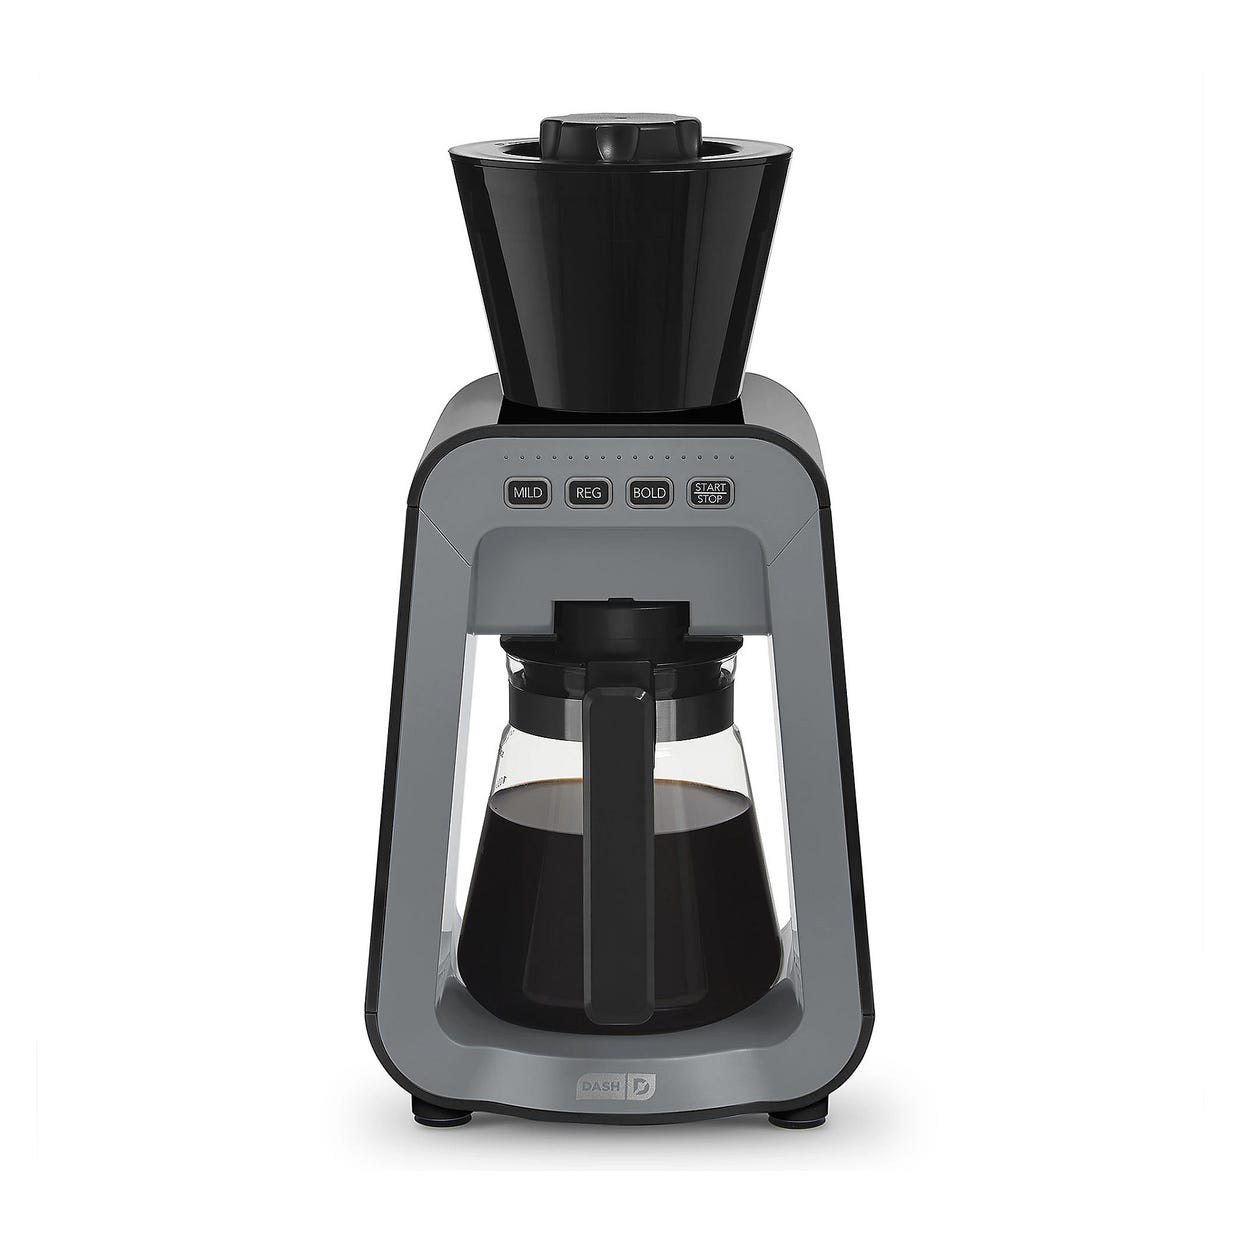 A Dash brand coffee maker with a glass carafe and digital settings.